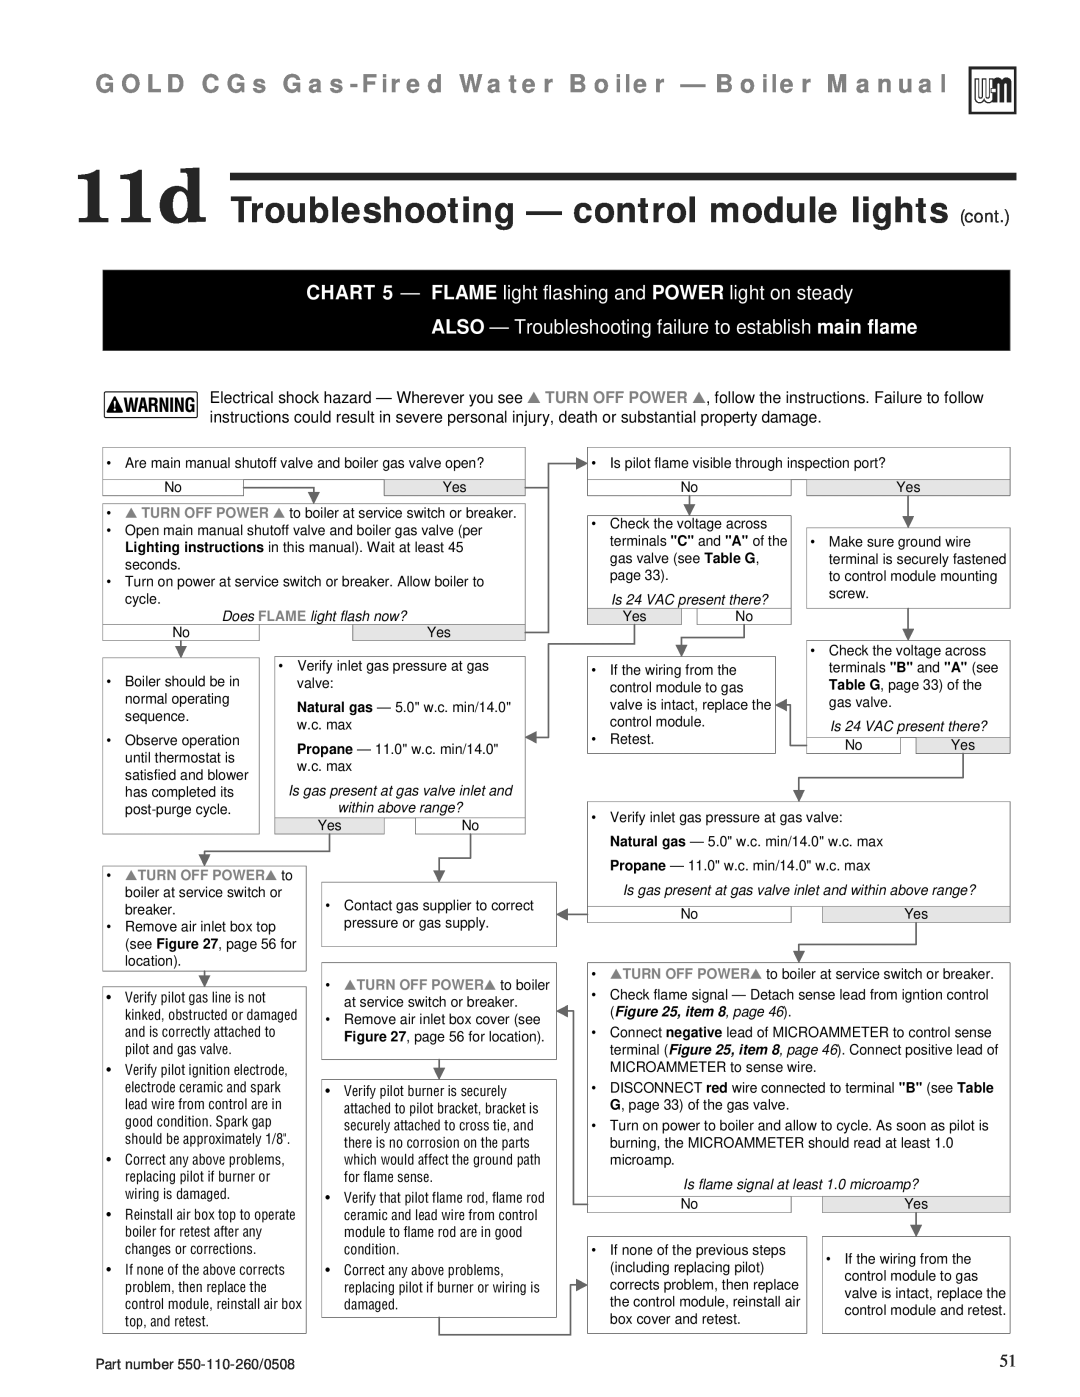 Weil-McLain 550-110-260/0508 manual 11d Troubleshooting — control module lights cont, • TURN OFF POWER to, item 8, page 